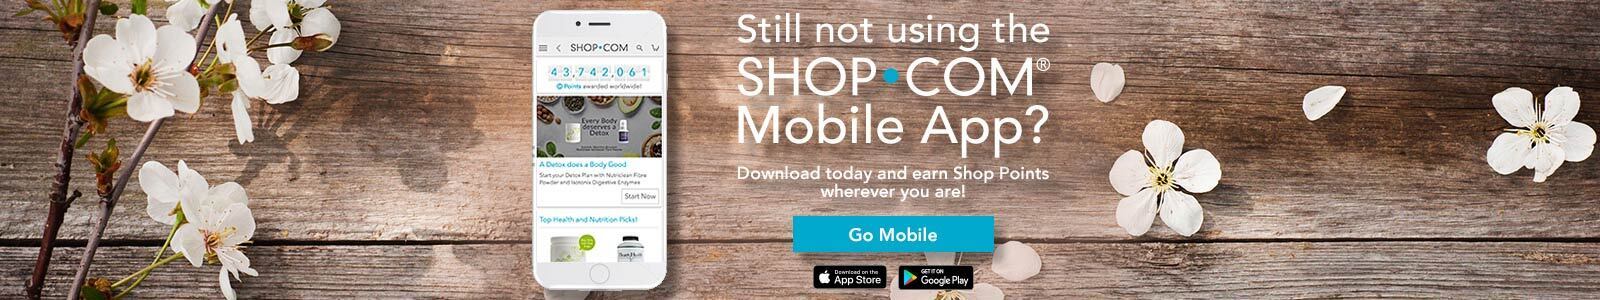 Still not using the Shop.com mobile App? Download today and earn Shop Points wherever you are! Go Mobile. Available in the App Store. Android App in Goolge Play